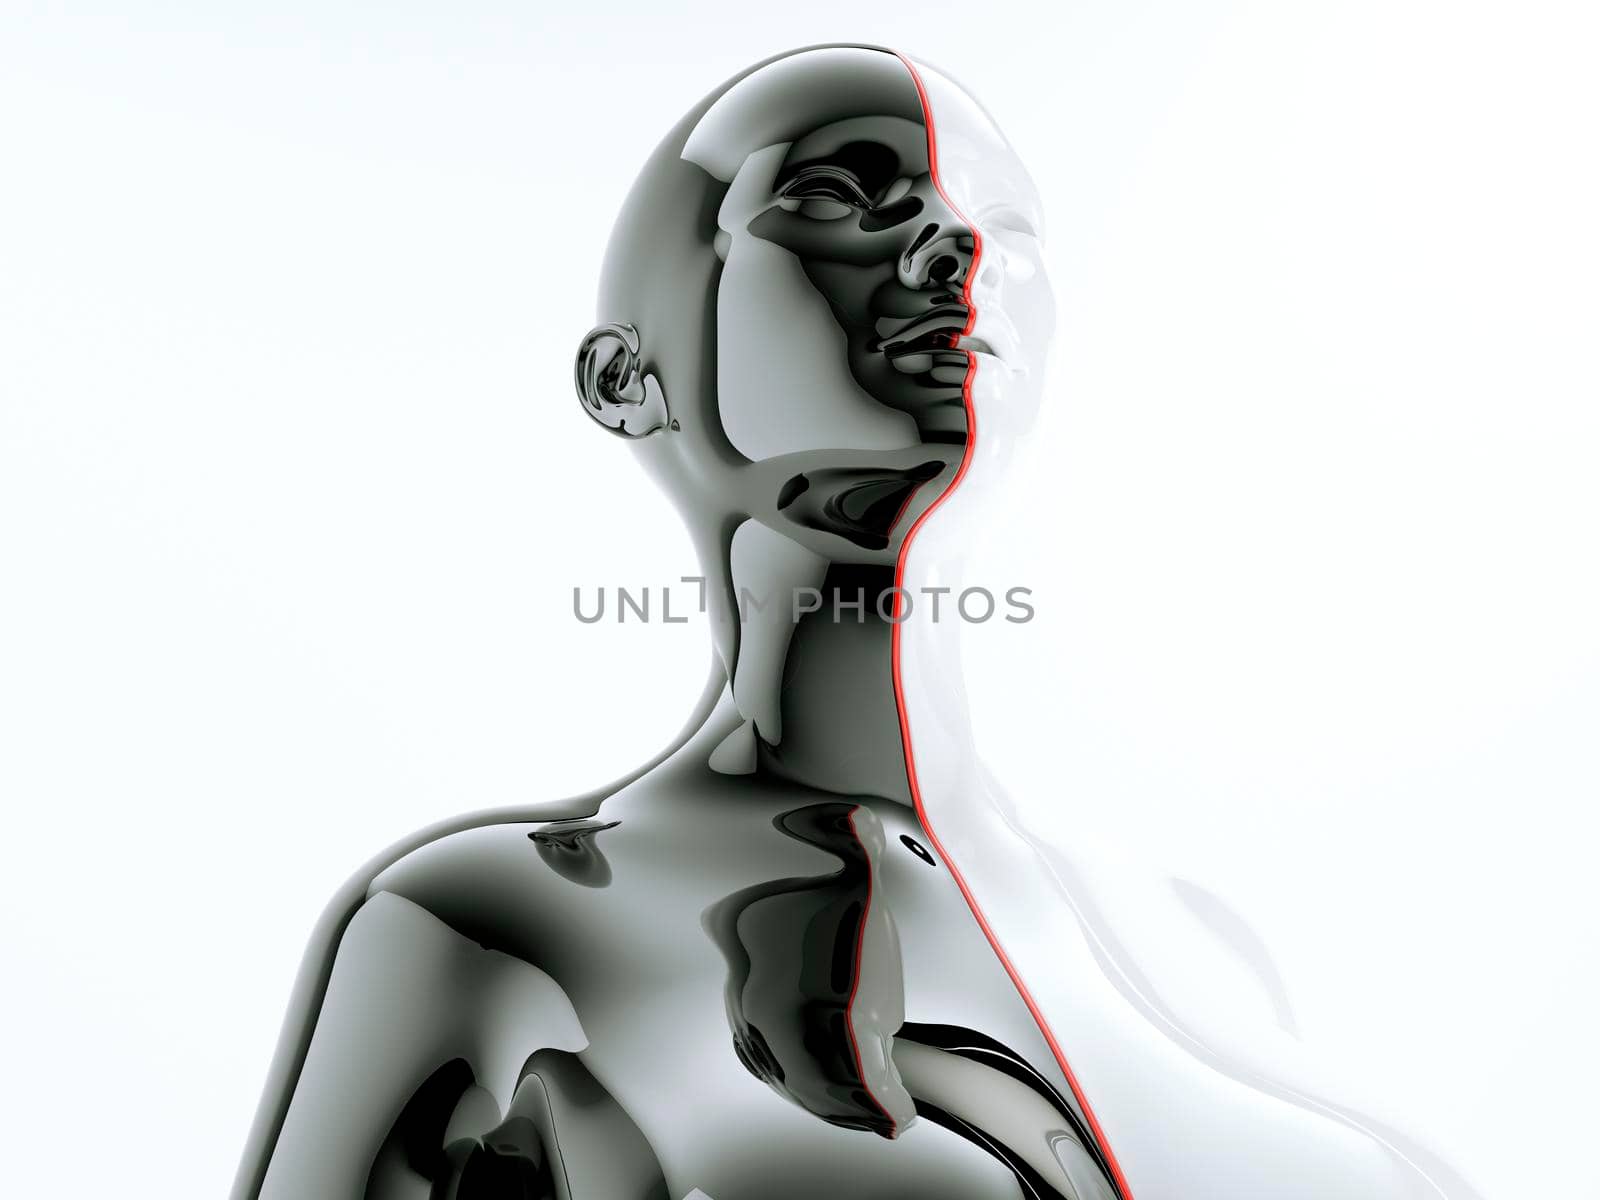 Black and white female body separated by red line as symbol of balance and diversity